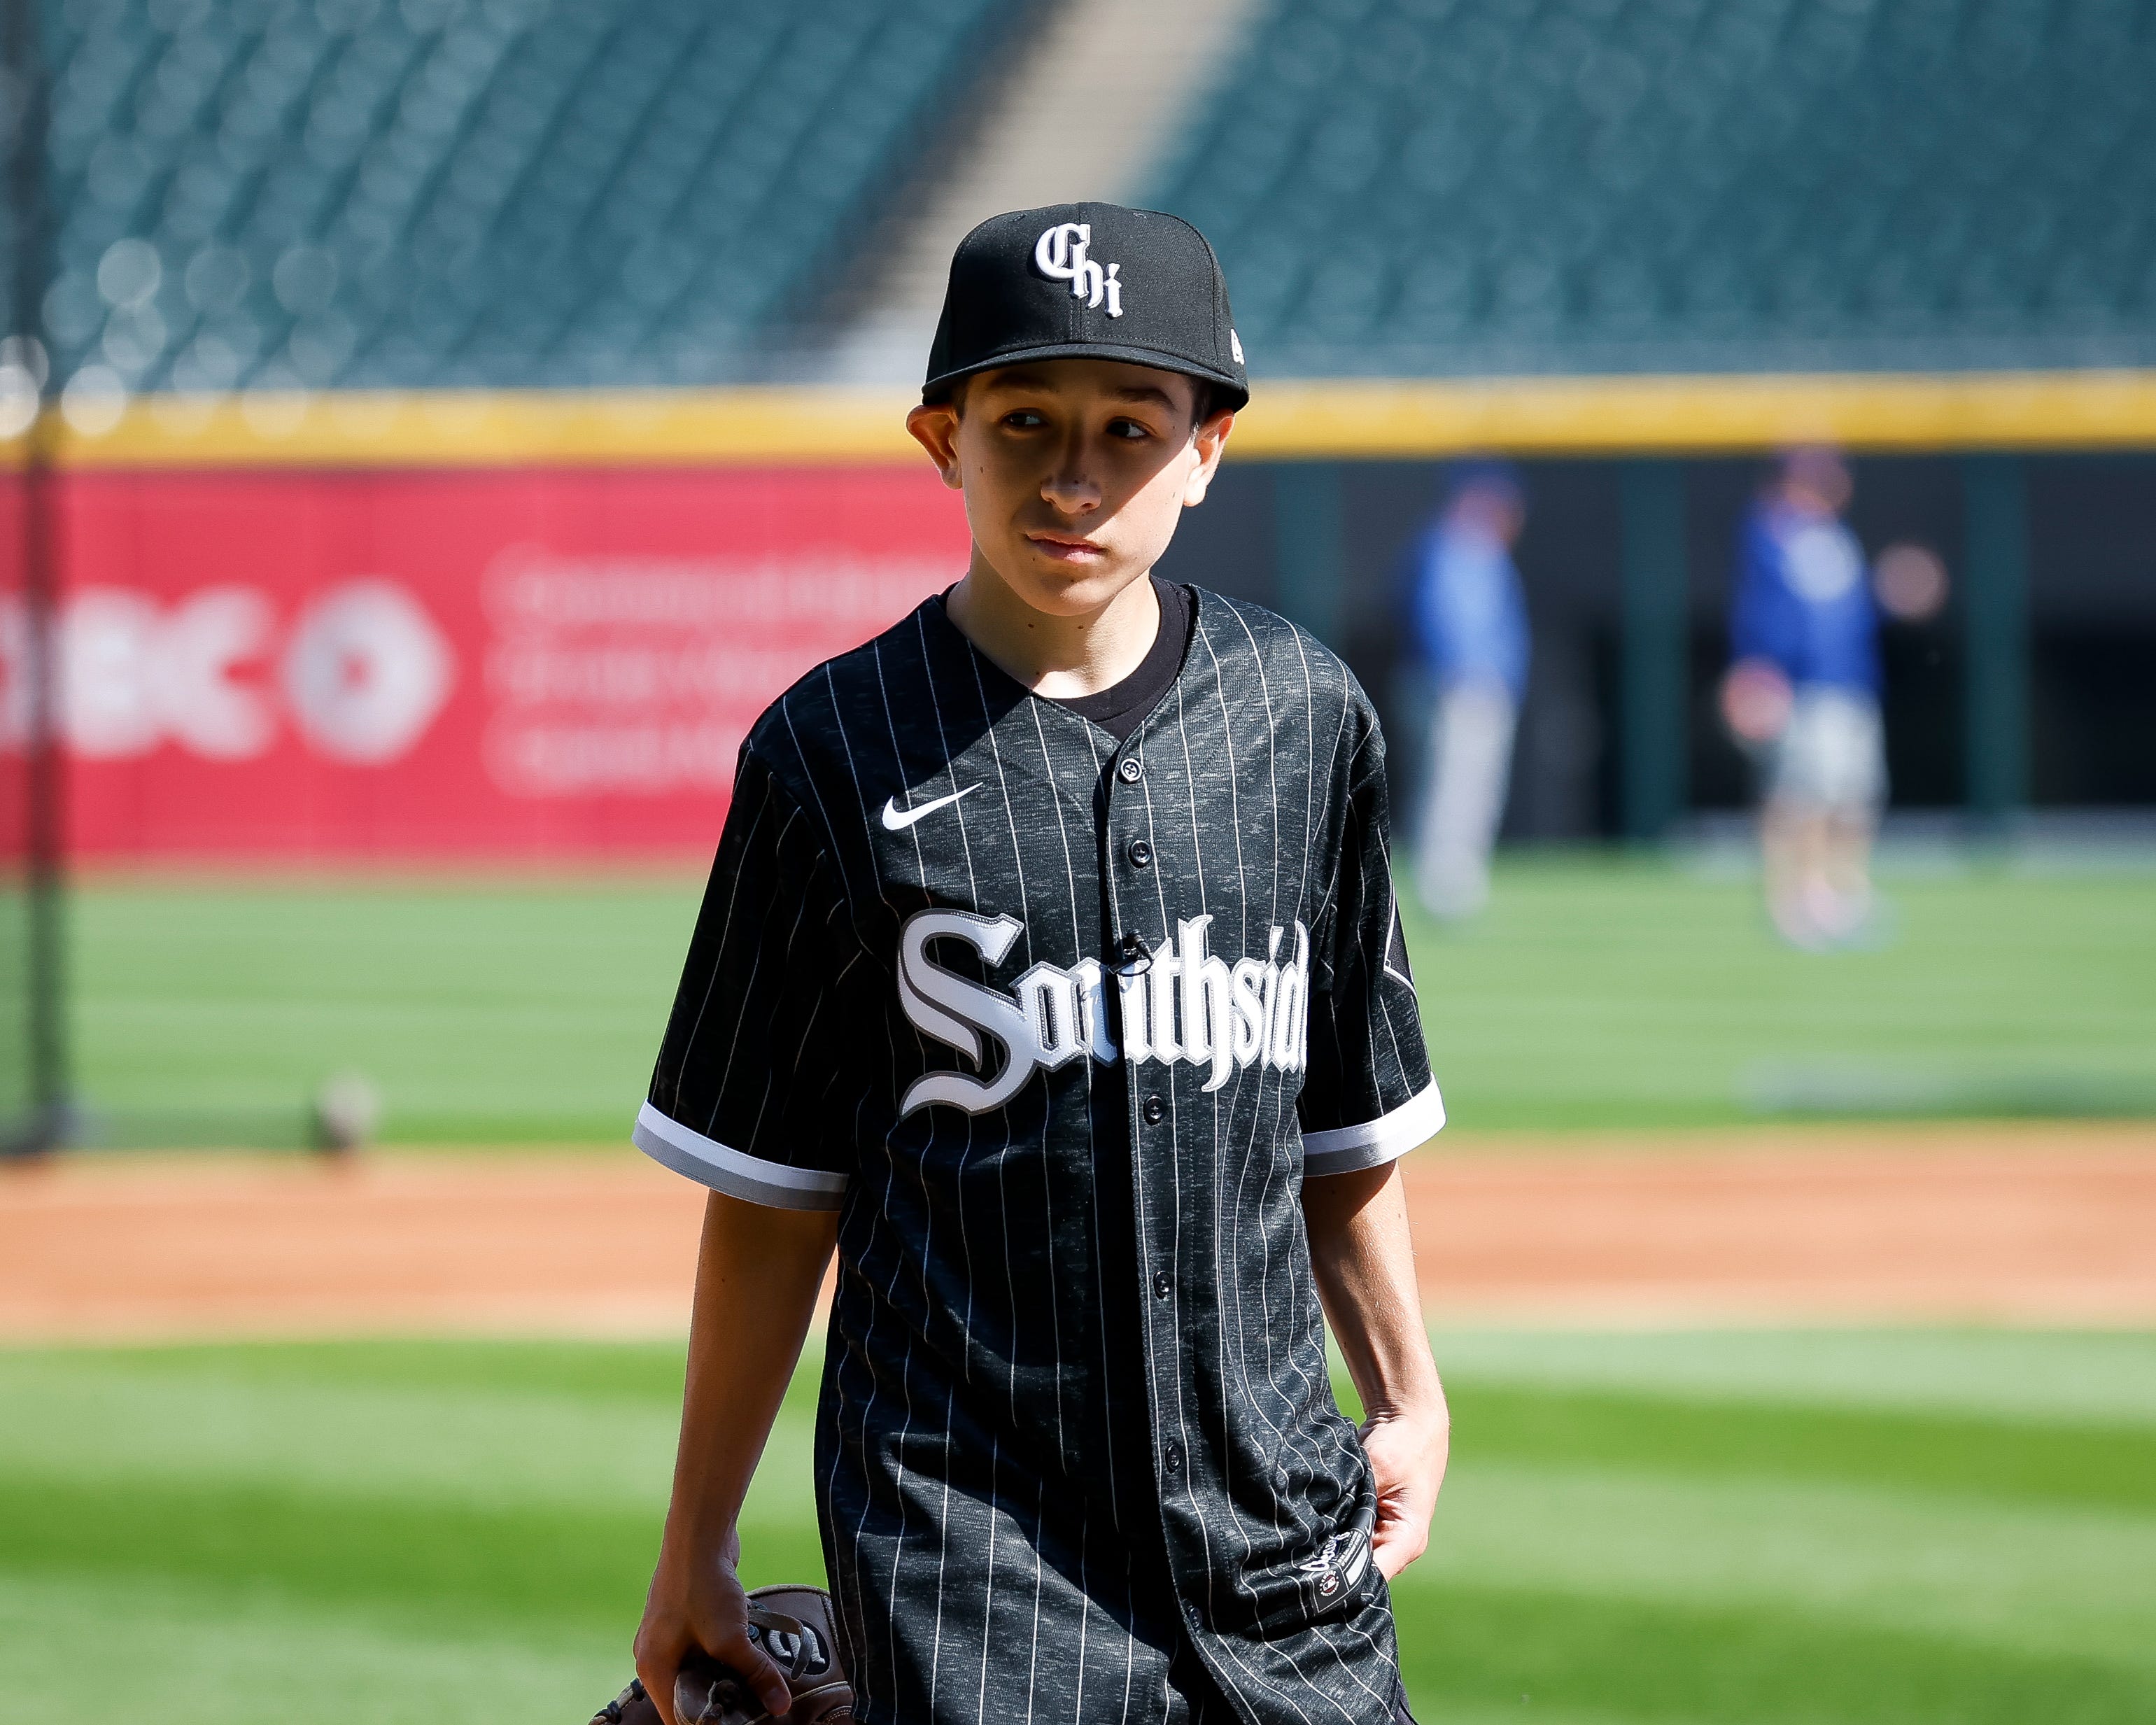 Sox Serve Week in Photos - Inside the White Sox